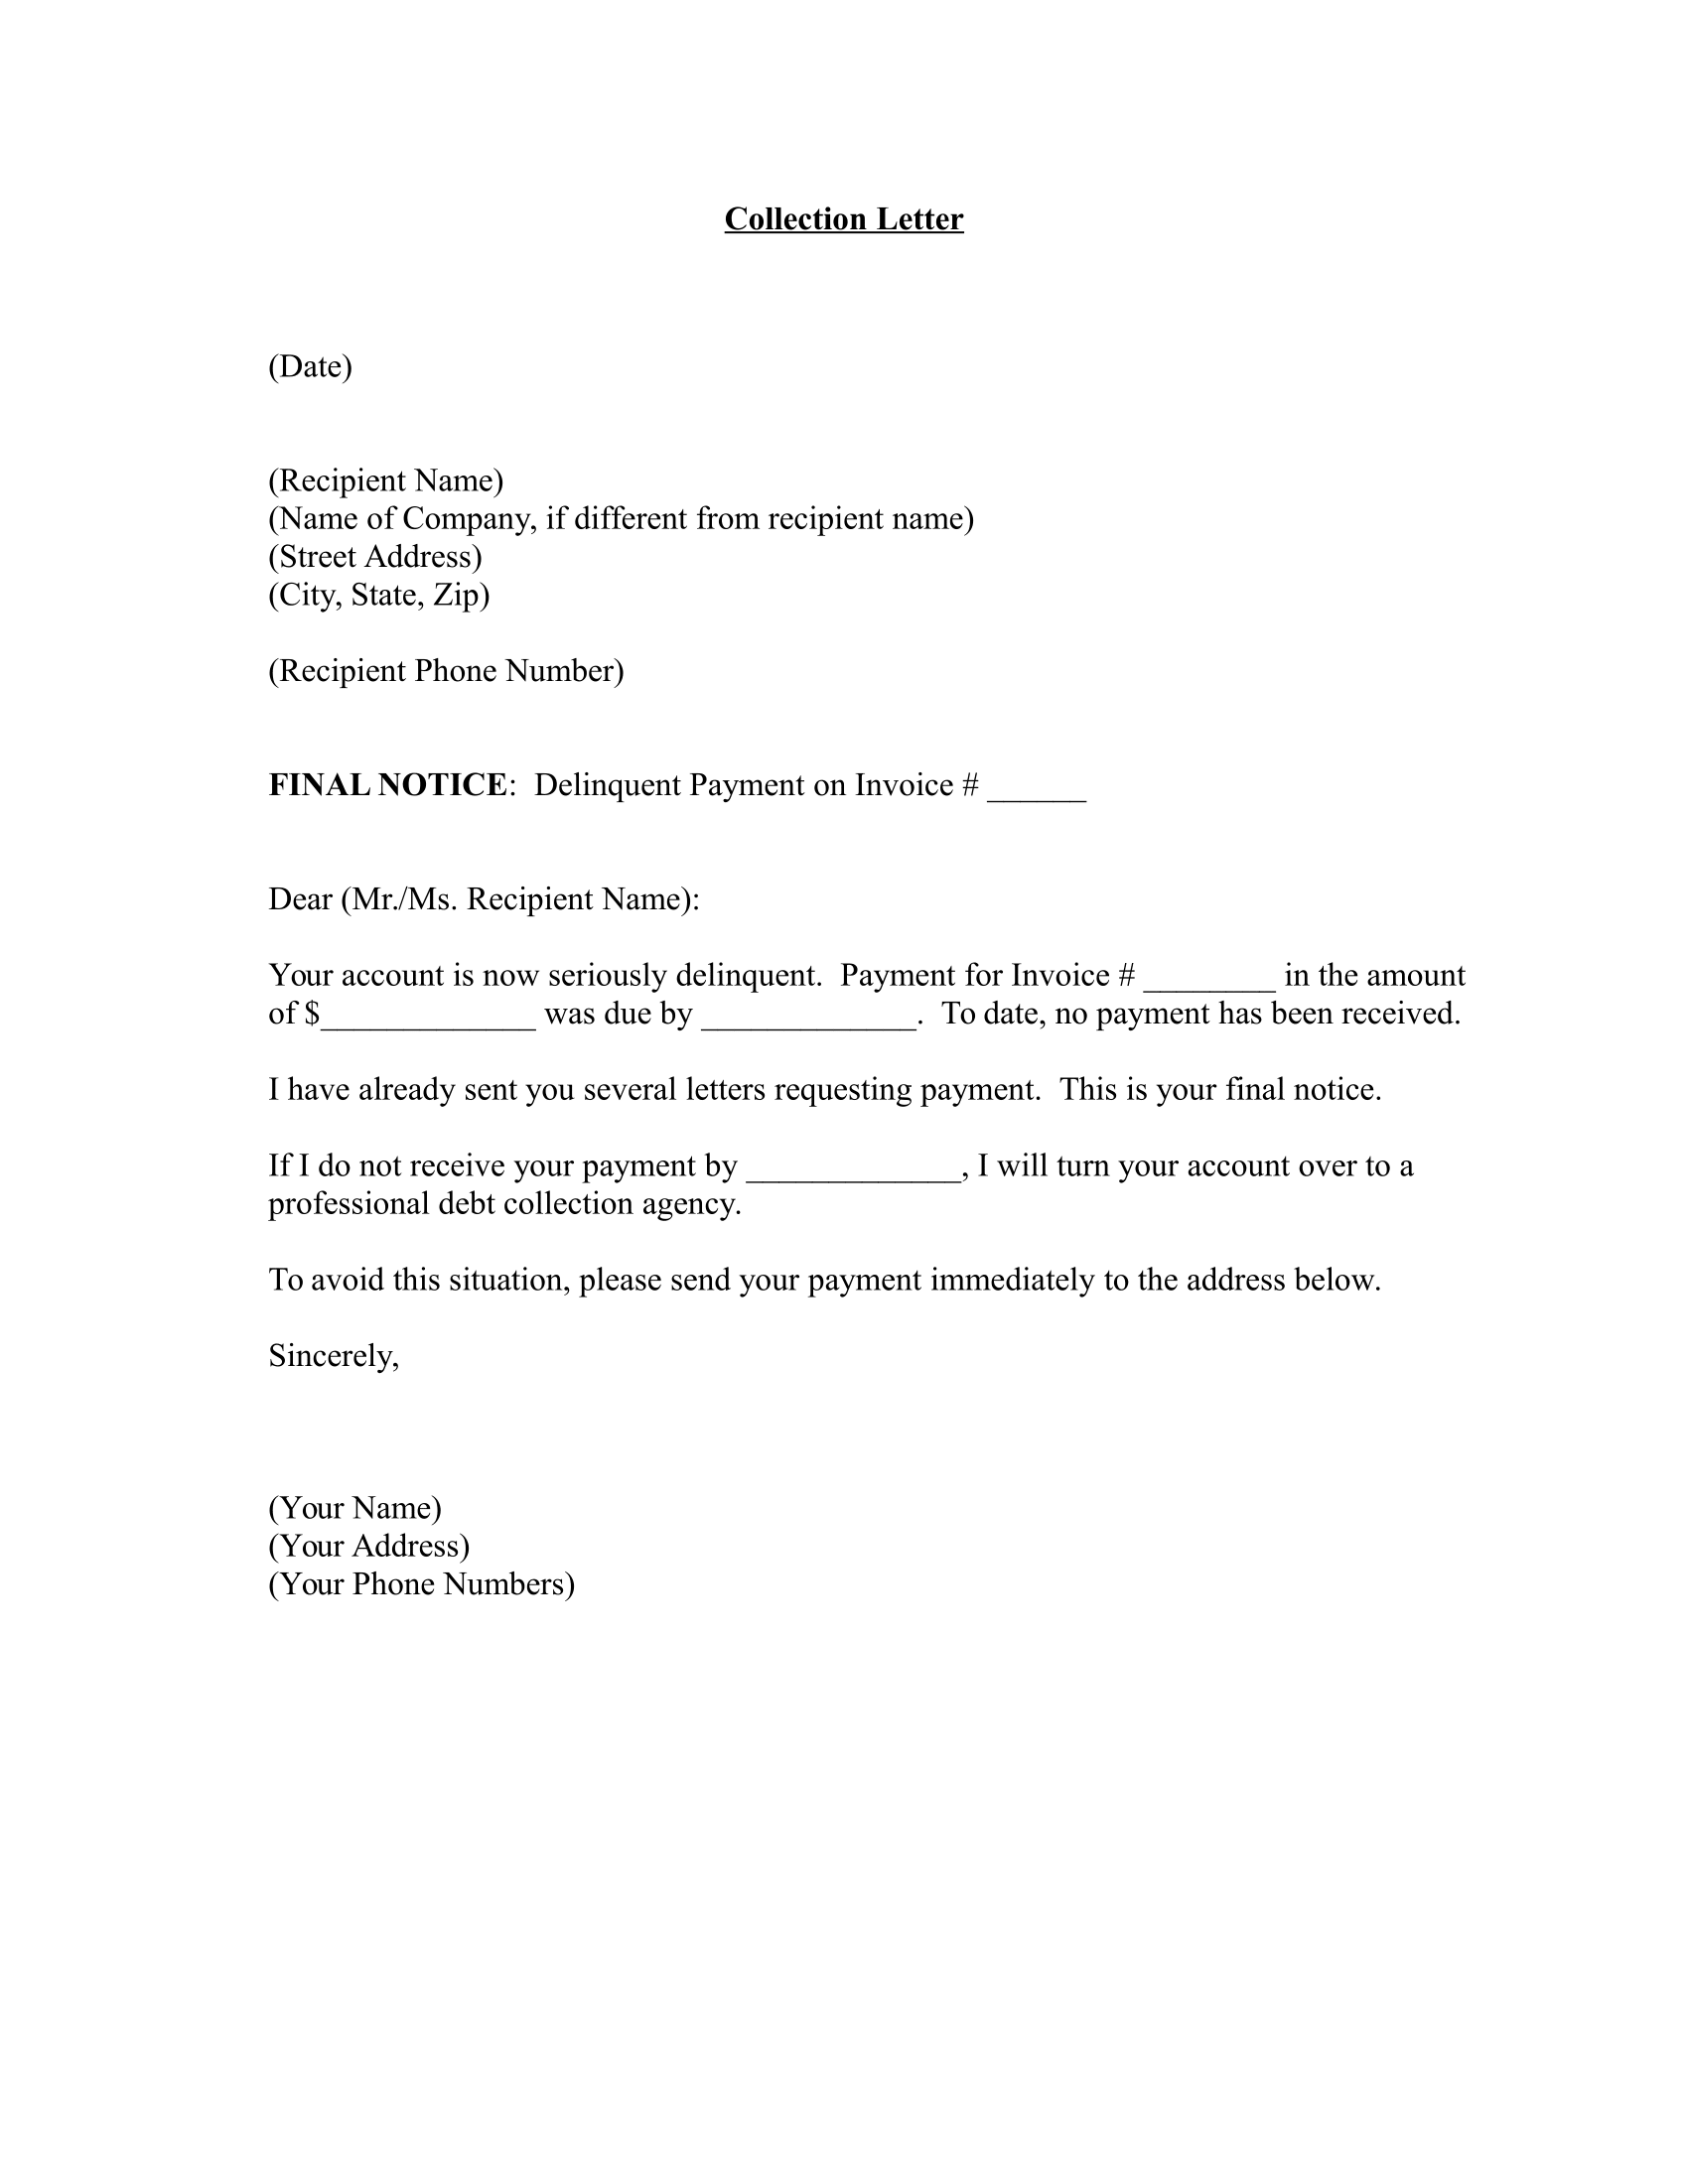 Sample Collection Letter To Customer from officewriting.com